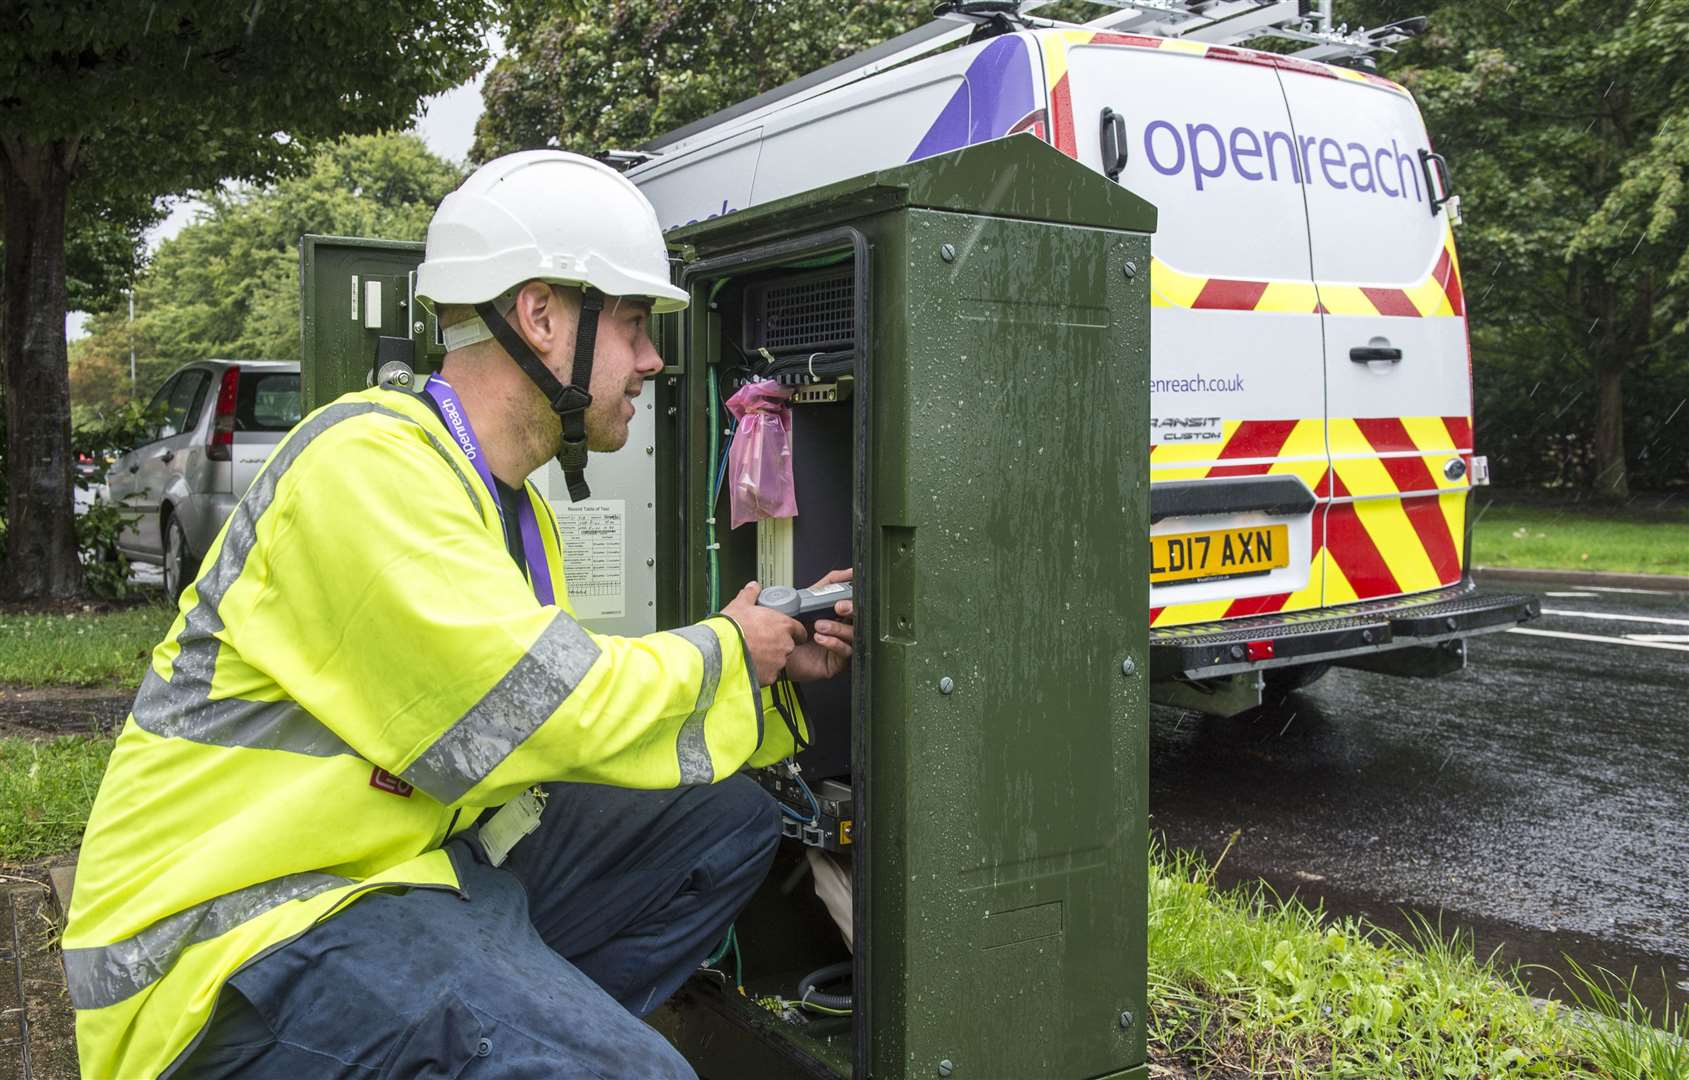 An Openreach engineer at work on a roadside cabinet